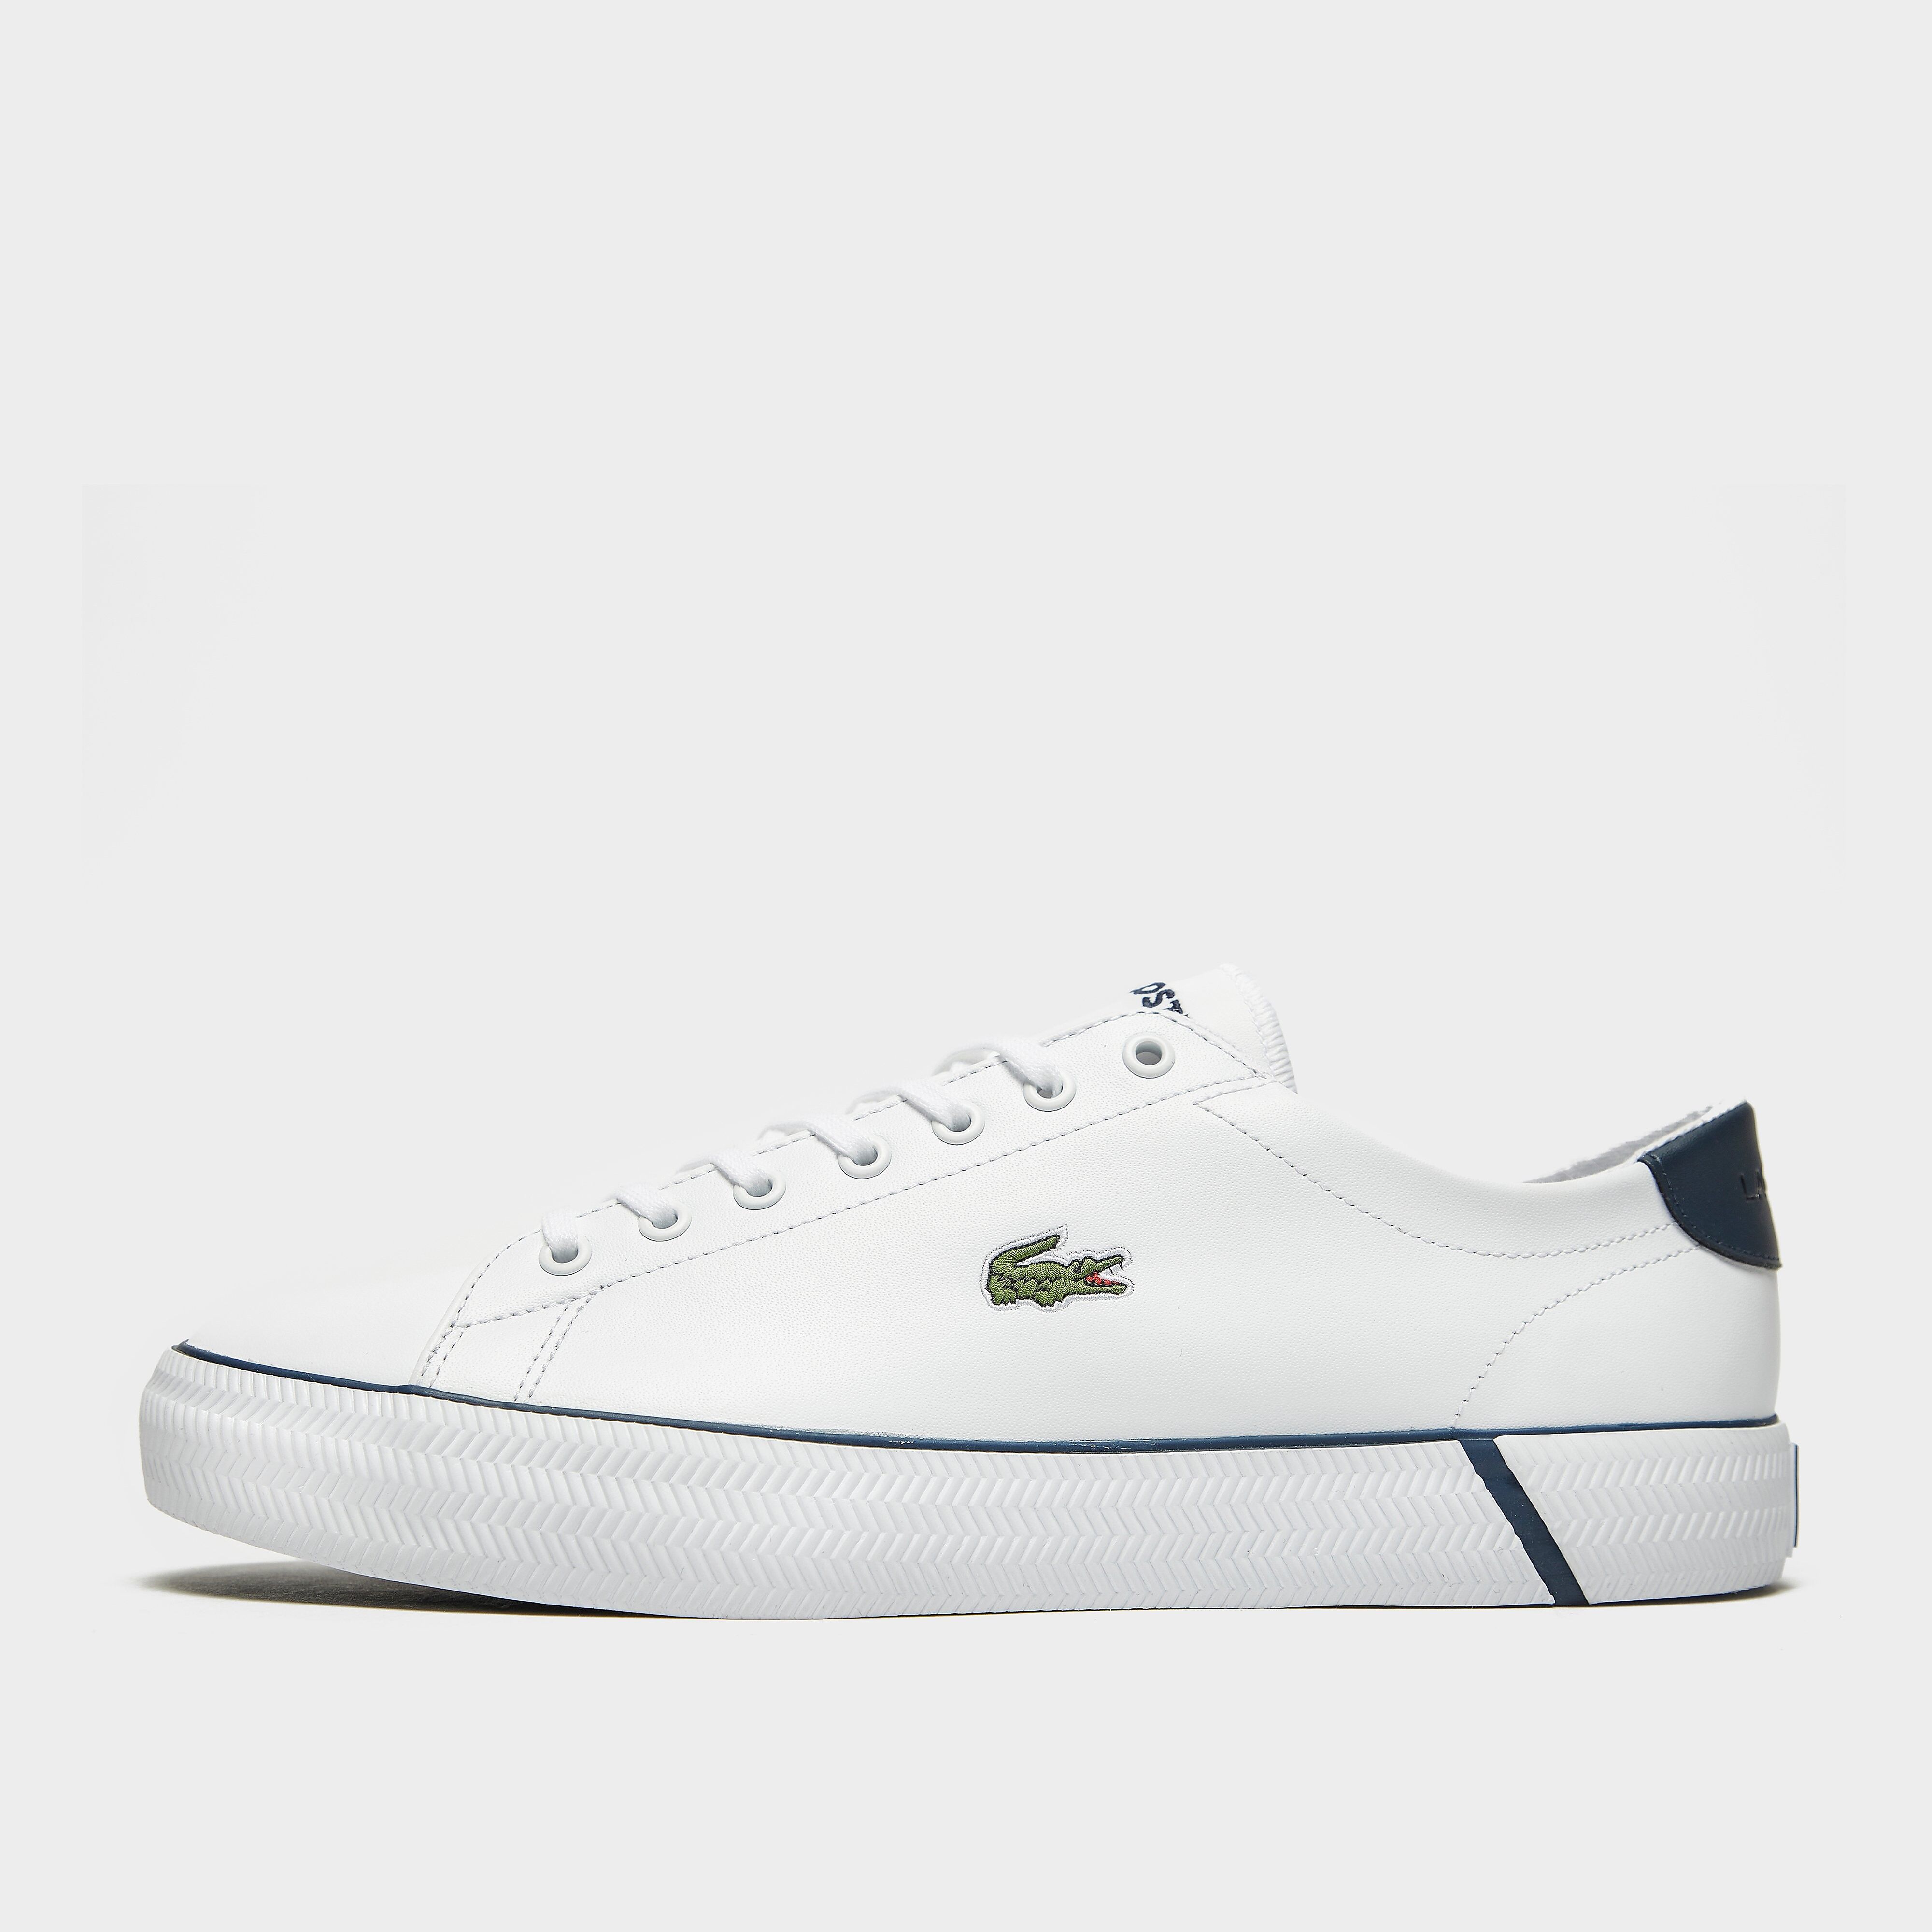 Lacoste Gripshot - White - Mens  size: 8